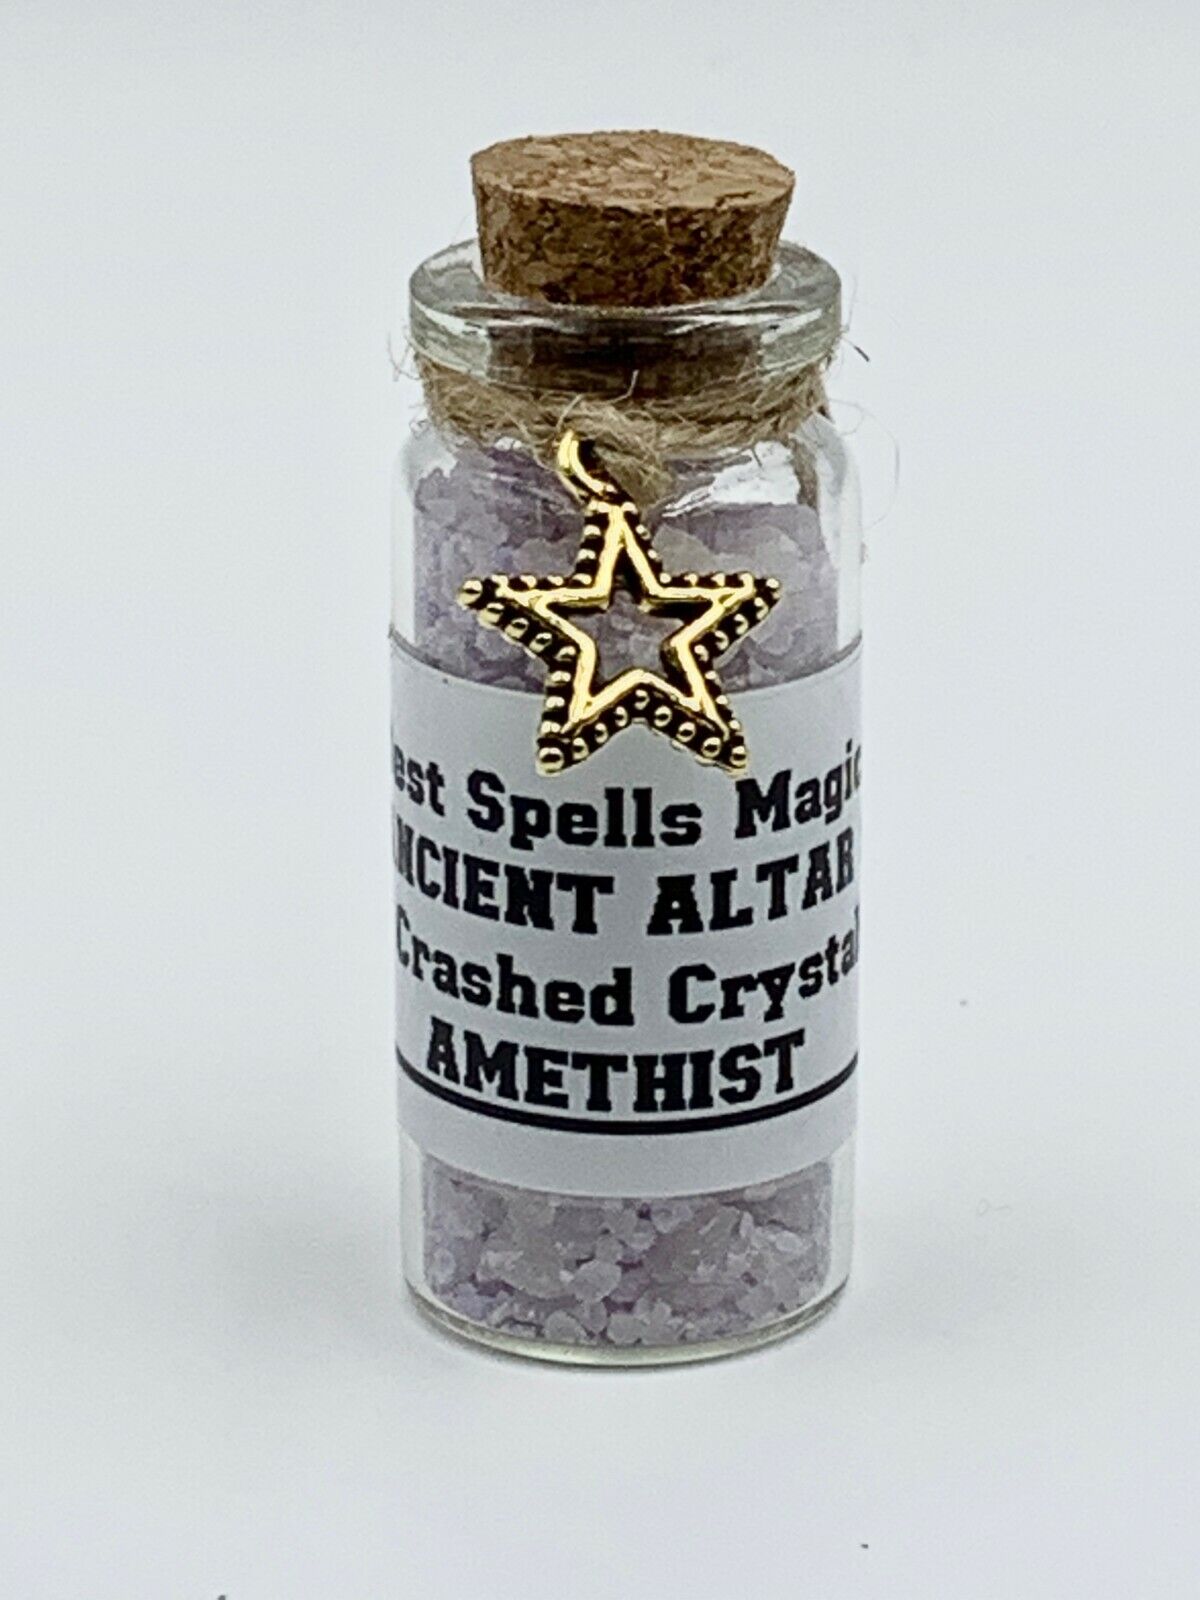 AMETHYST Ancient Altar Blessed Witches Salt &Crashed Crystals Best Spells Magick